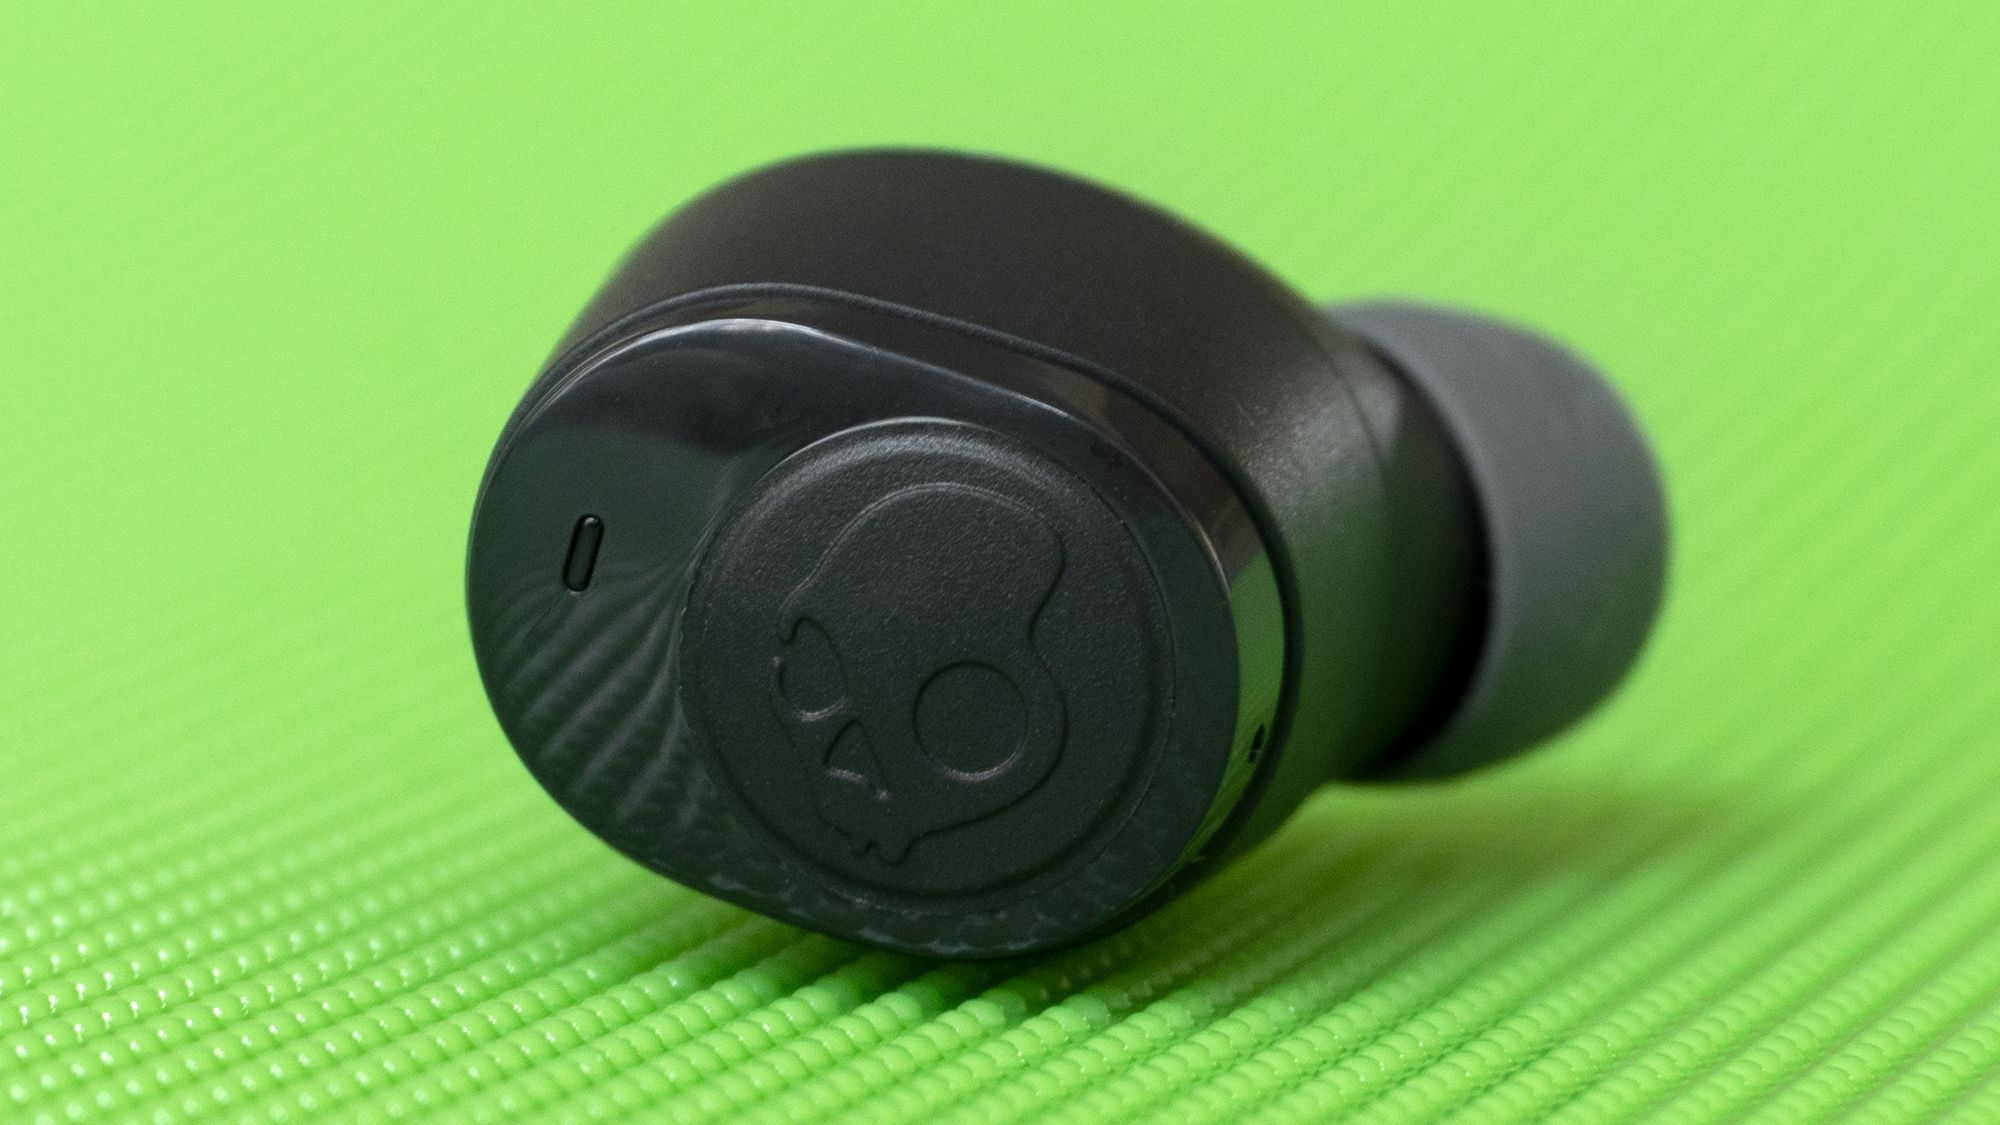 You like skull motifs, right? On each earbud is a button for activating various functions, but it's hard to press without accidentally dislodging the bud. (Photo: Andrew Liszewski/Gizmodo)